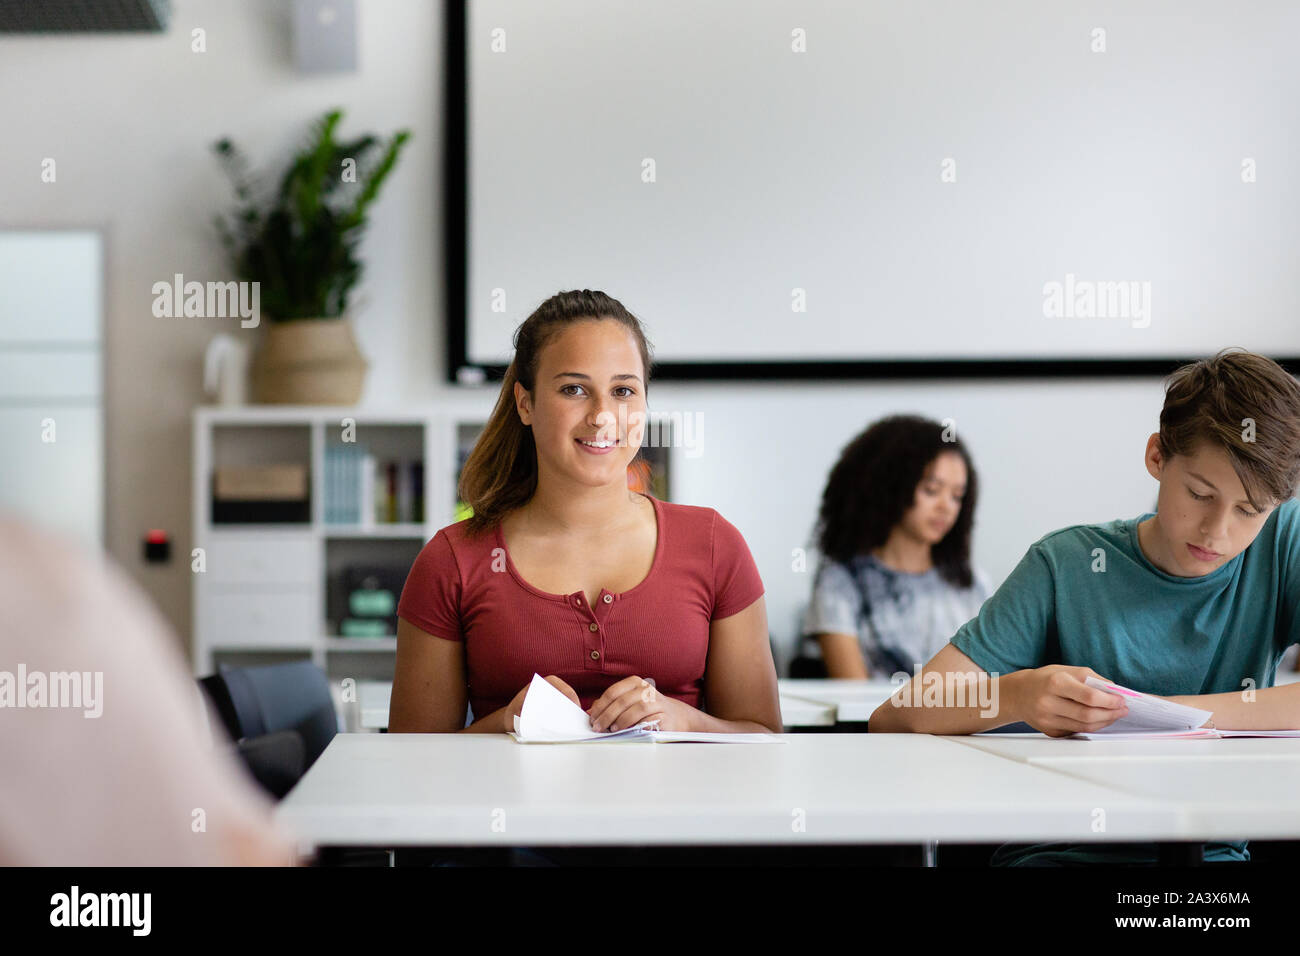 Portrait of female high school student in class Stock Photo